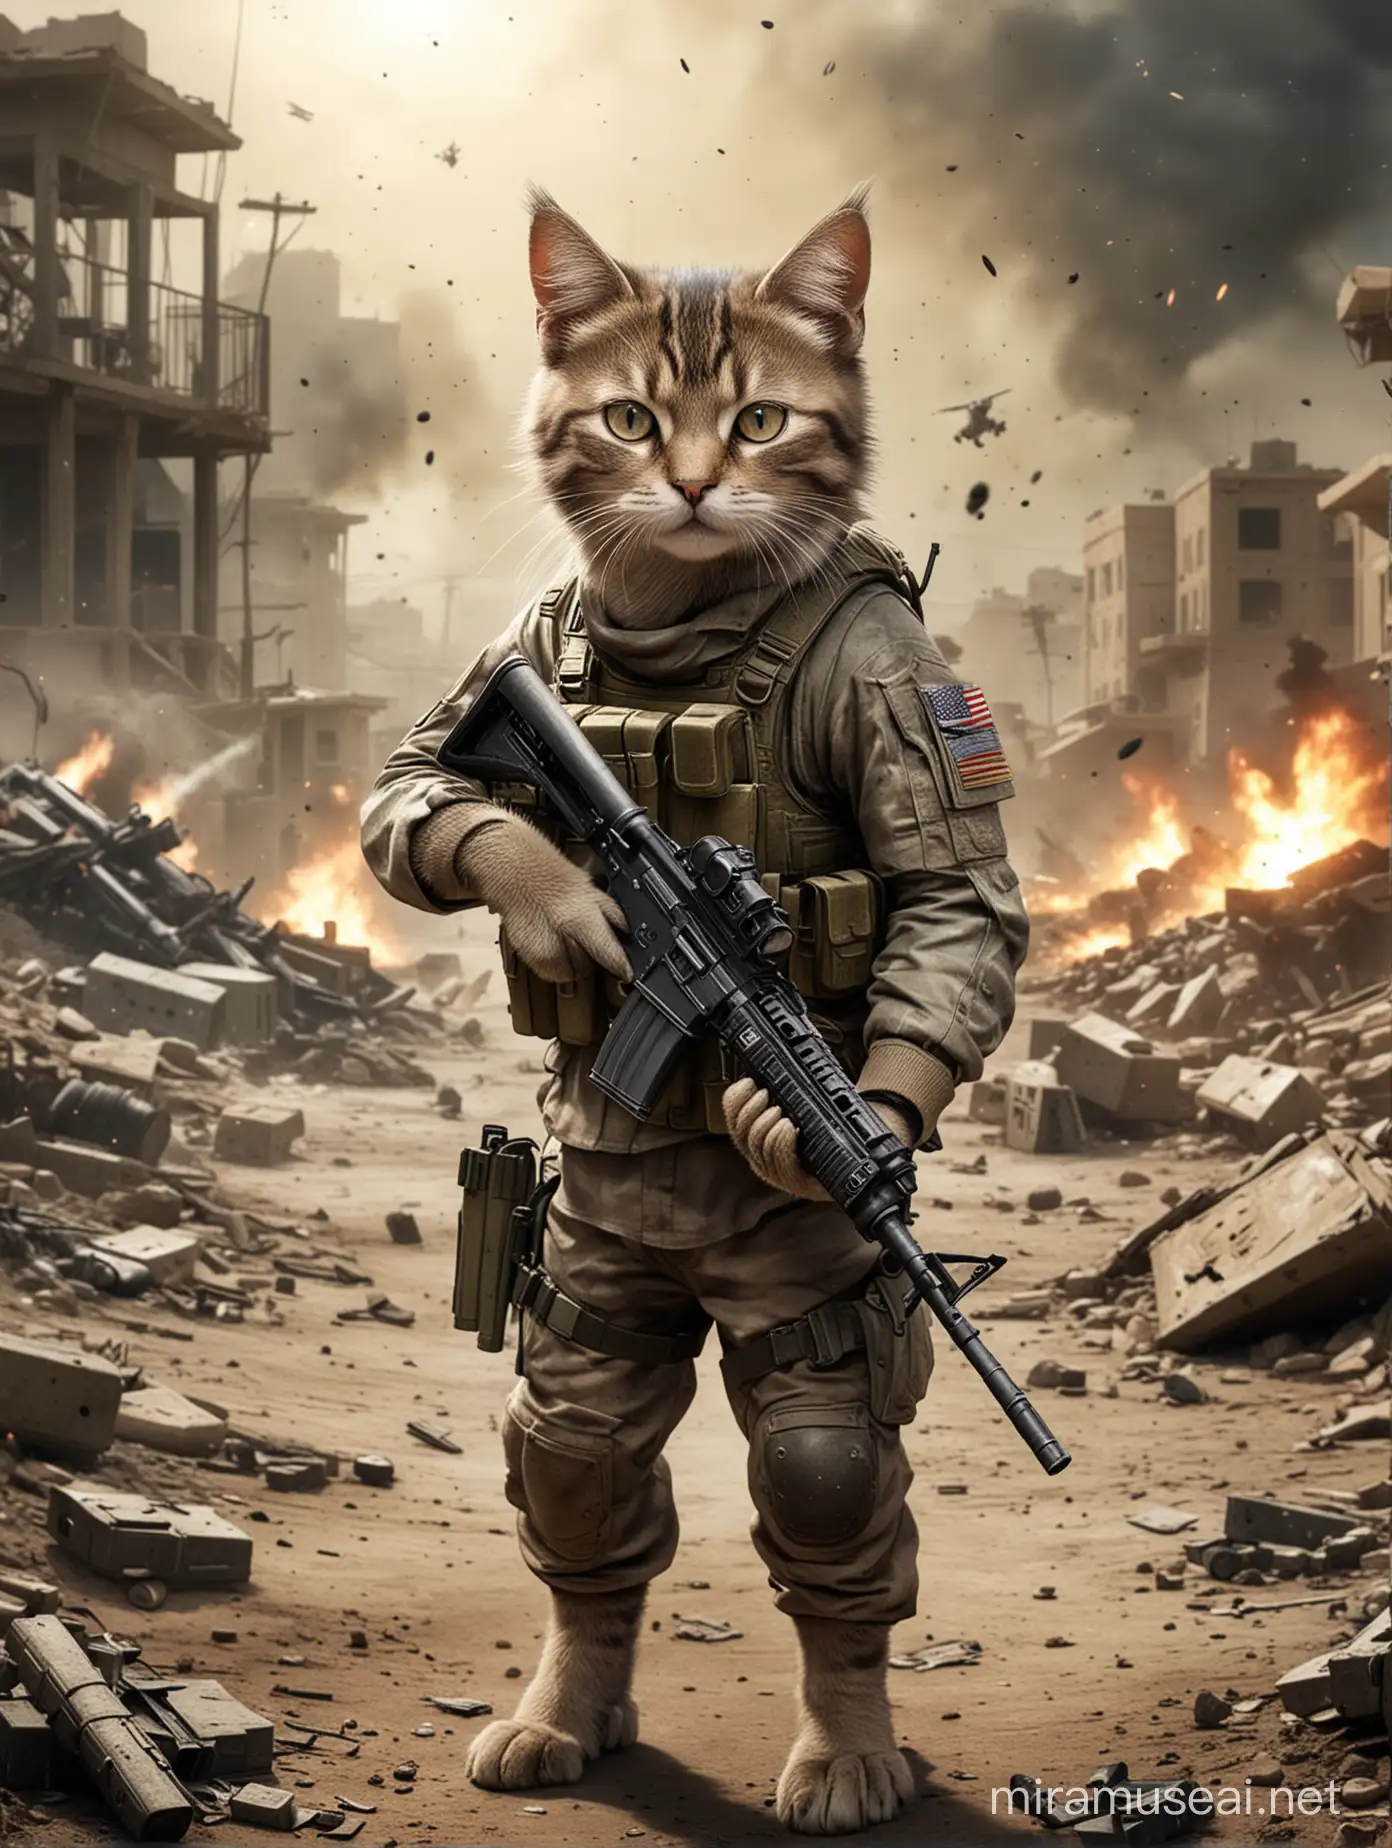 Adorable Kitty Engages in Call of Duty Battle